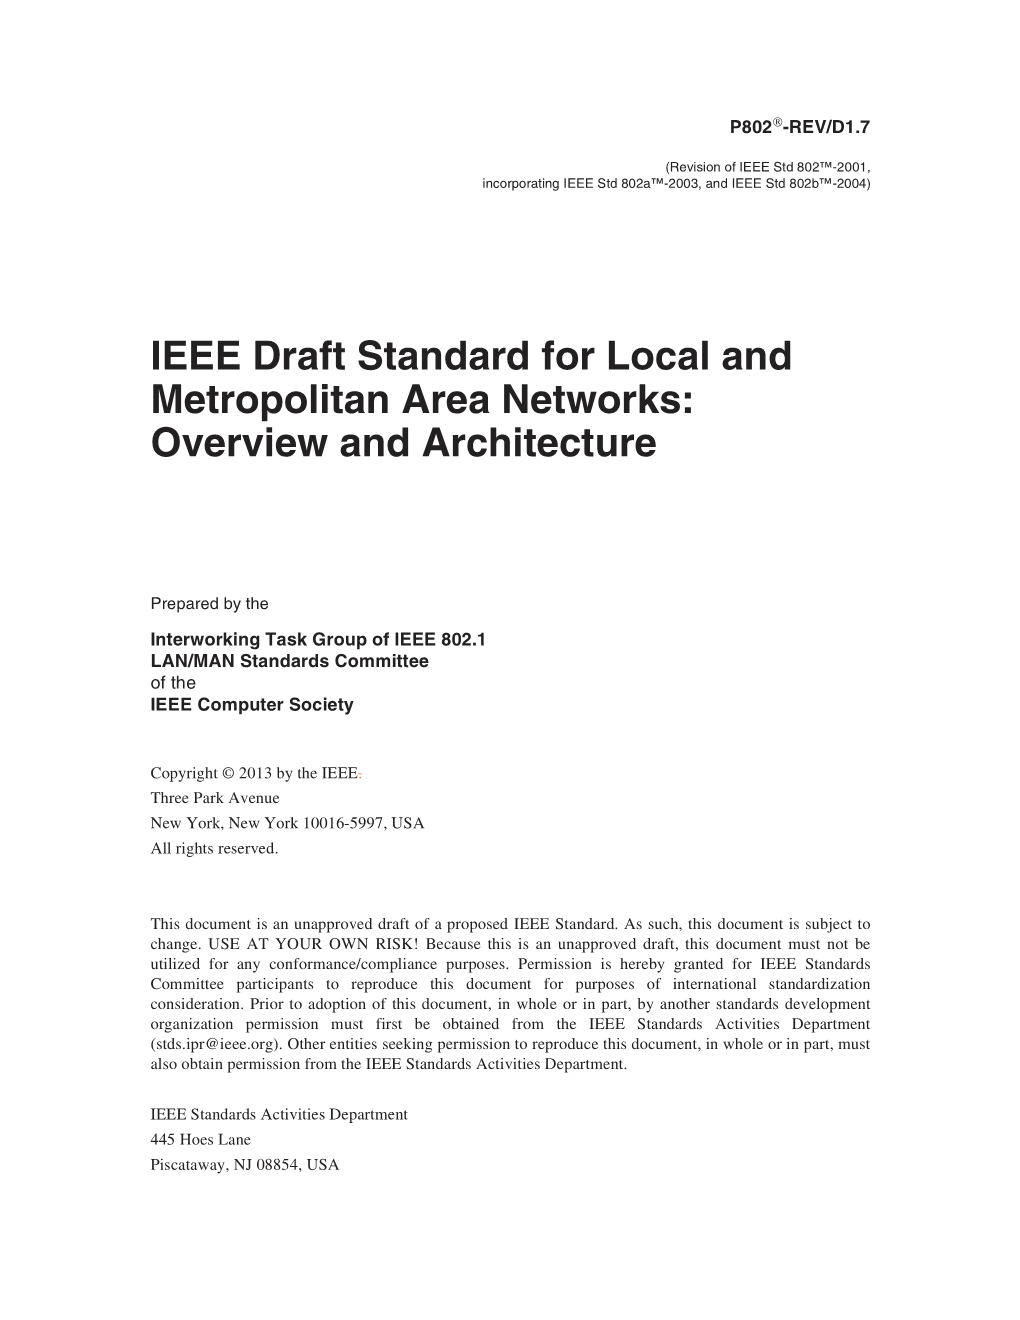 IEEE Draft Standard for Local and Metropolitan Area Networks: Overview and Architecture